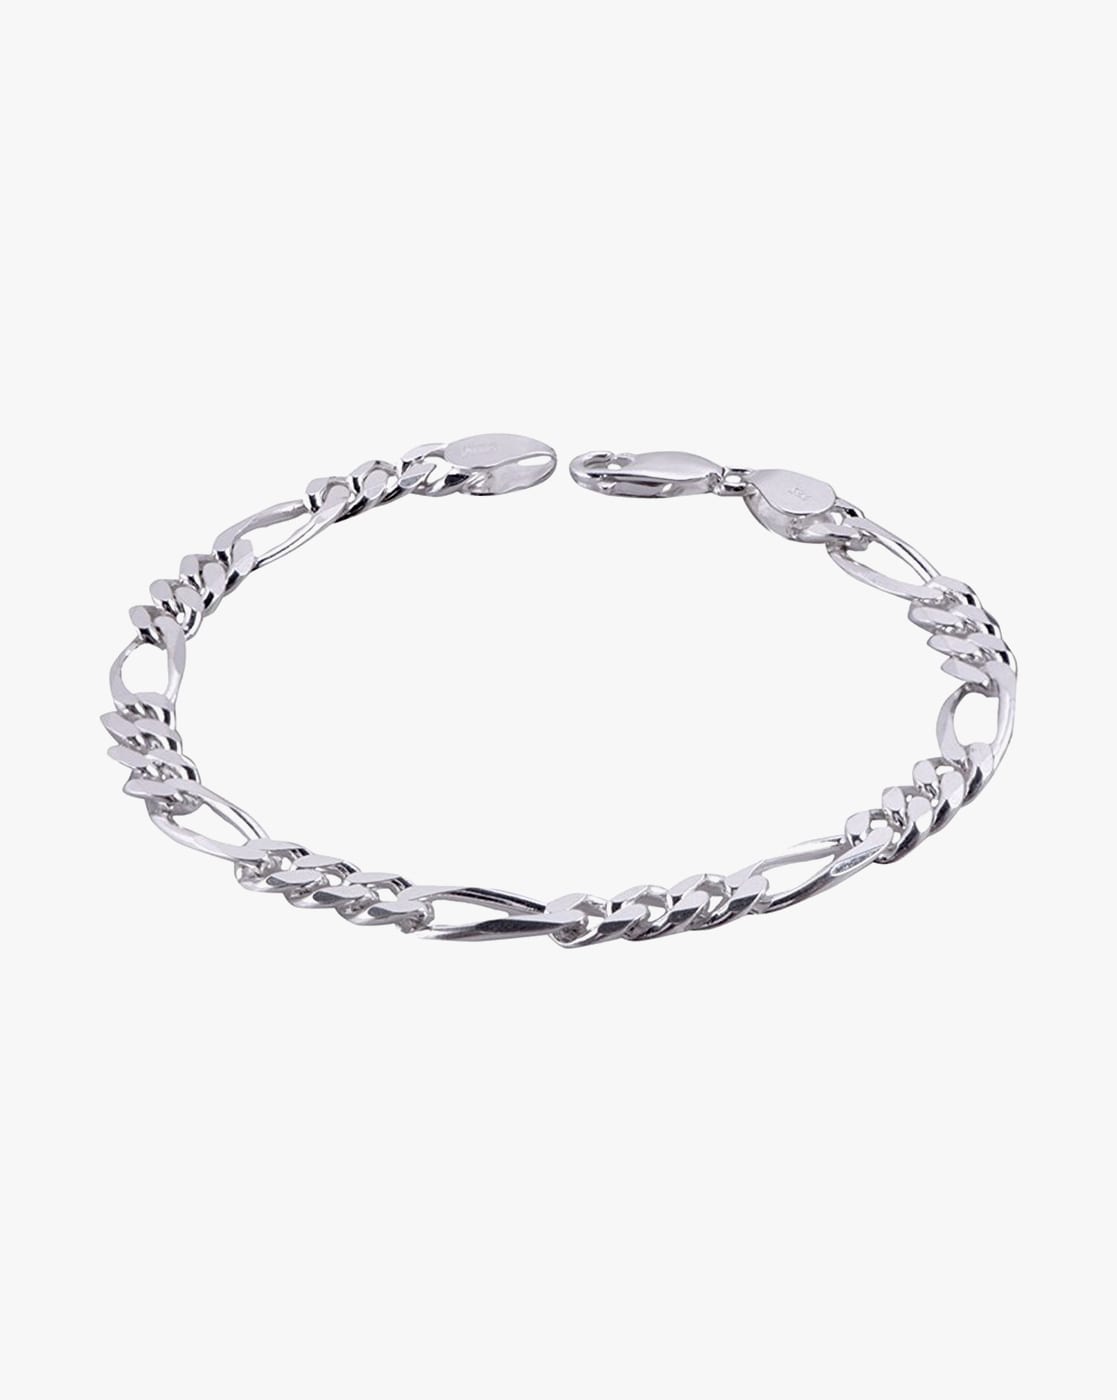 Amazon.com: Madina Jewelry 925 kt Sterling Silver Fancy Polished 13 mm Wide  Bracelet, Lays Smooth on Wrist, 7.5”: Clothing, Shoes & Jewelry